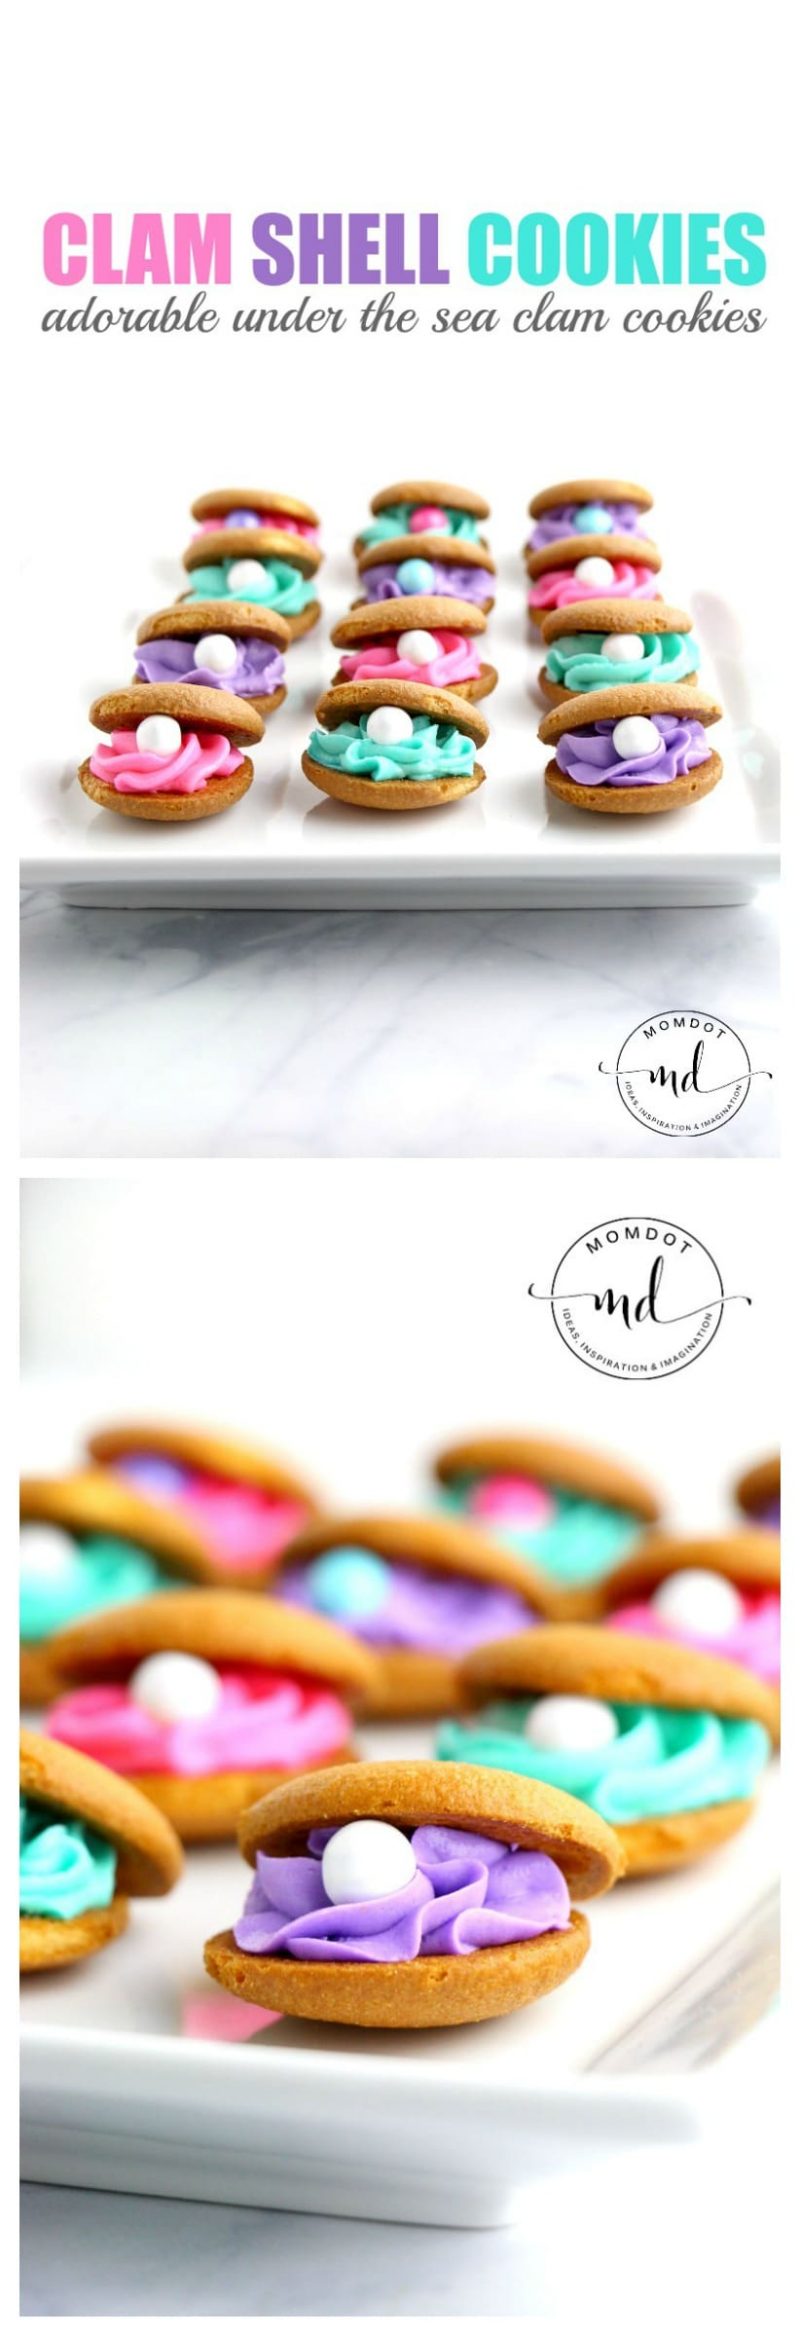 Clam Shell Cookies Made with Nilla Wafers, perfect for a mermaid party plus QUICK, EASY and ADORABLE!